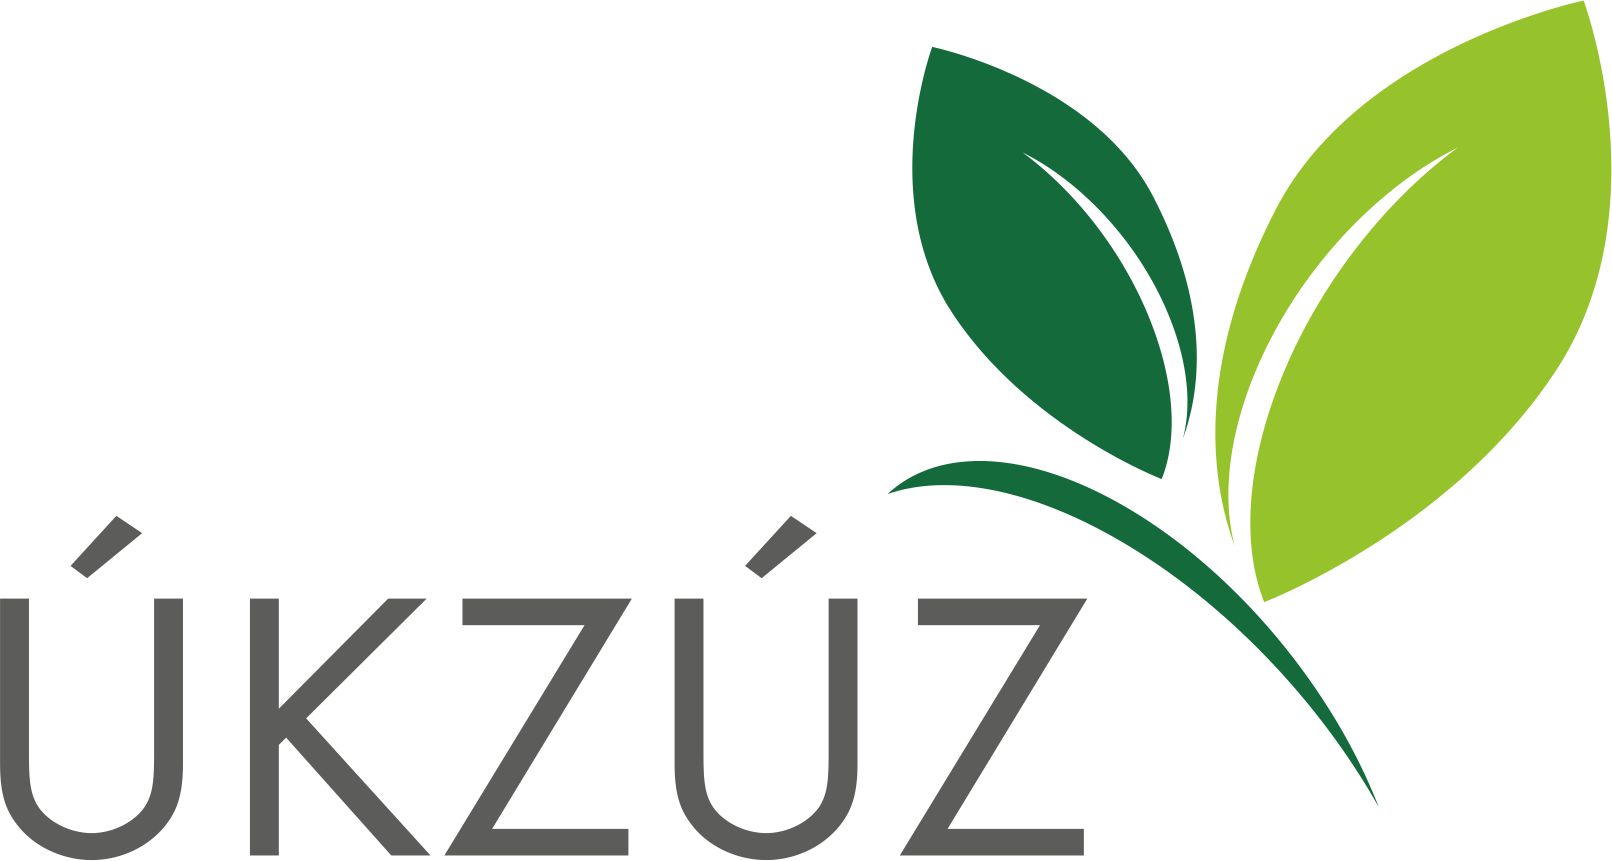 CENTRAL INSTITUTE FOR SUPERVISING AND TESTING IN AGRICULTURE (UKZUZ)